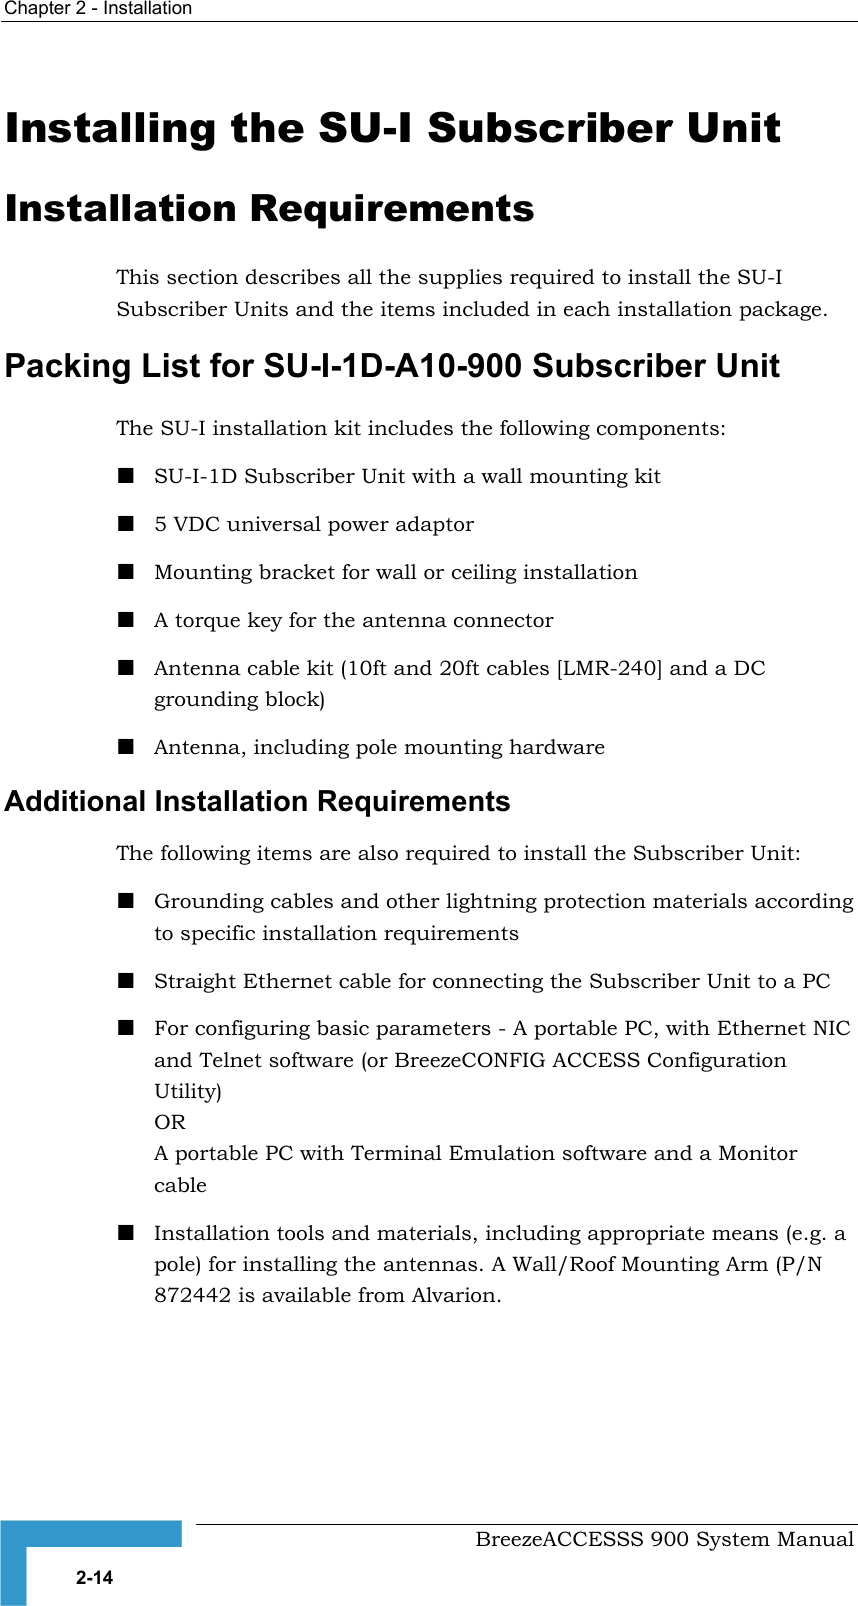 Chapter 2 - Installation   Installing the SU-I Subscriber Unit Installation Requirements This section describes all the supplies required to install the SU-I Subscriber Units and the items included in each installation package. Packing List for SU-I-1D-A10-900 Subscriber Unit The SU-I installation kit includes the following components:  SU-I-1D Subscriber Unit with a wall mounting kit  5 VDC universal power adaptor  Mounting bracket for wall or ceiling installation   A torque key for the antenna connector   Antenna cable kit (10ft and 20ft cables [LMR-240] and a DC grounding block)  Antenna, including pole mounting hardware Additional Installation Requirements The following items are also required to install the Subscriber Unit:  Grounding cables and other lightning protection materials according to specific installation requirements   Straight Ethernet cable for connecting the Subscriber Unit to a PC  For configuring basic parameters - A portable PC, with Ethernet NIC and Telnet software (or BreezeCONFIG ACCESS Configuration Utility) OR A portable PC with Terminal Emulation software and a Monitor cable  Installation tools and materials, including appropriate means (e.g. a pole) for installing the antennas. A Wall/Roof Mounting Arm (P/N 872442 is available from Alvarion.    BreezeACCESSS 900 System Manual 2-14 